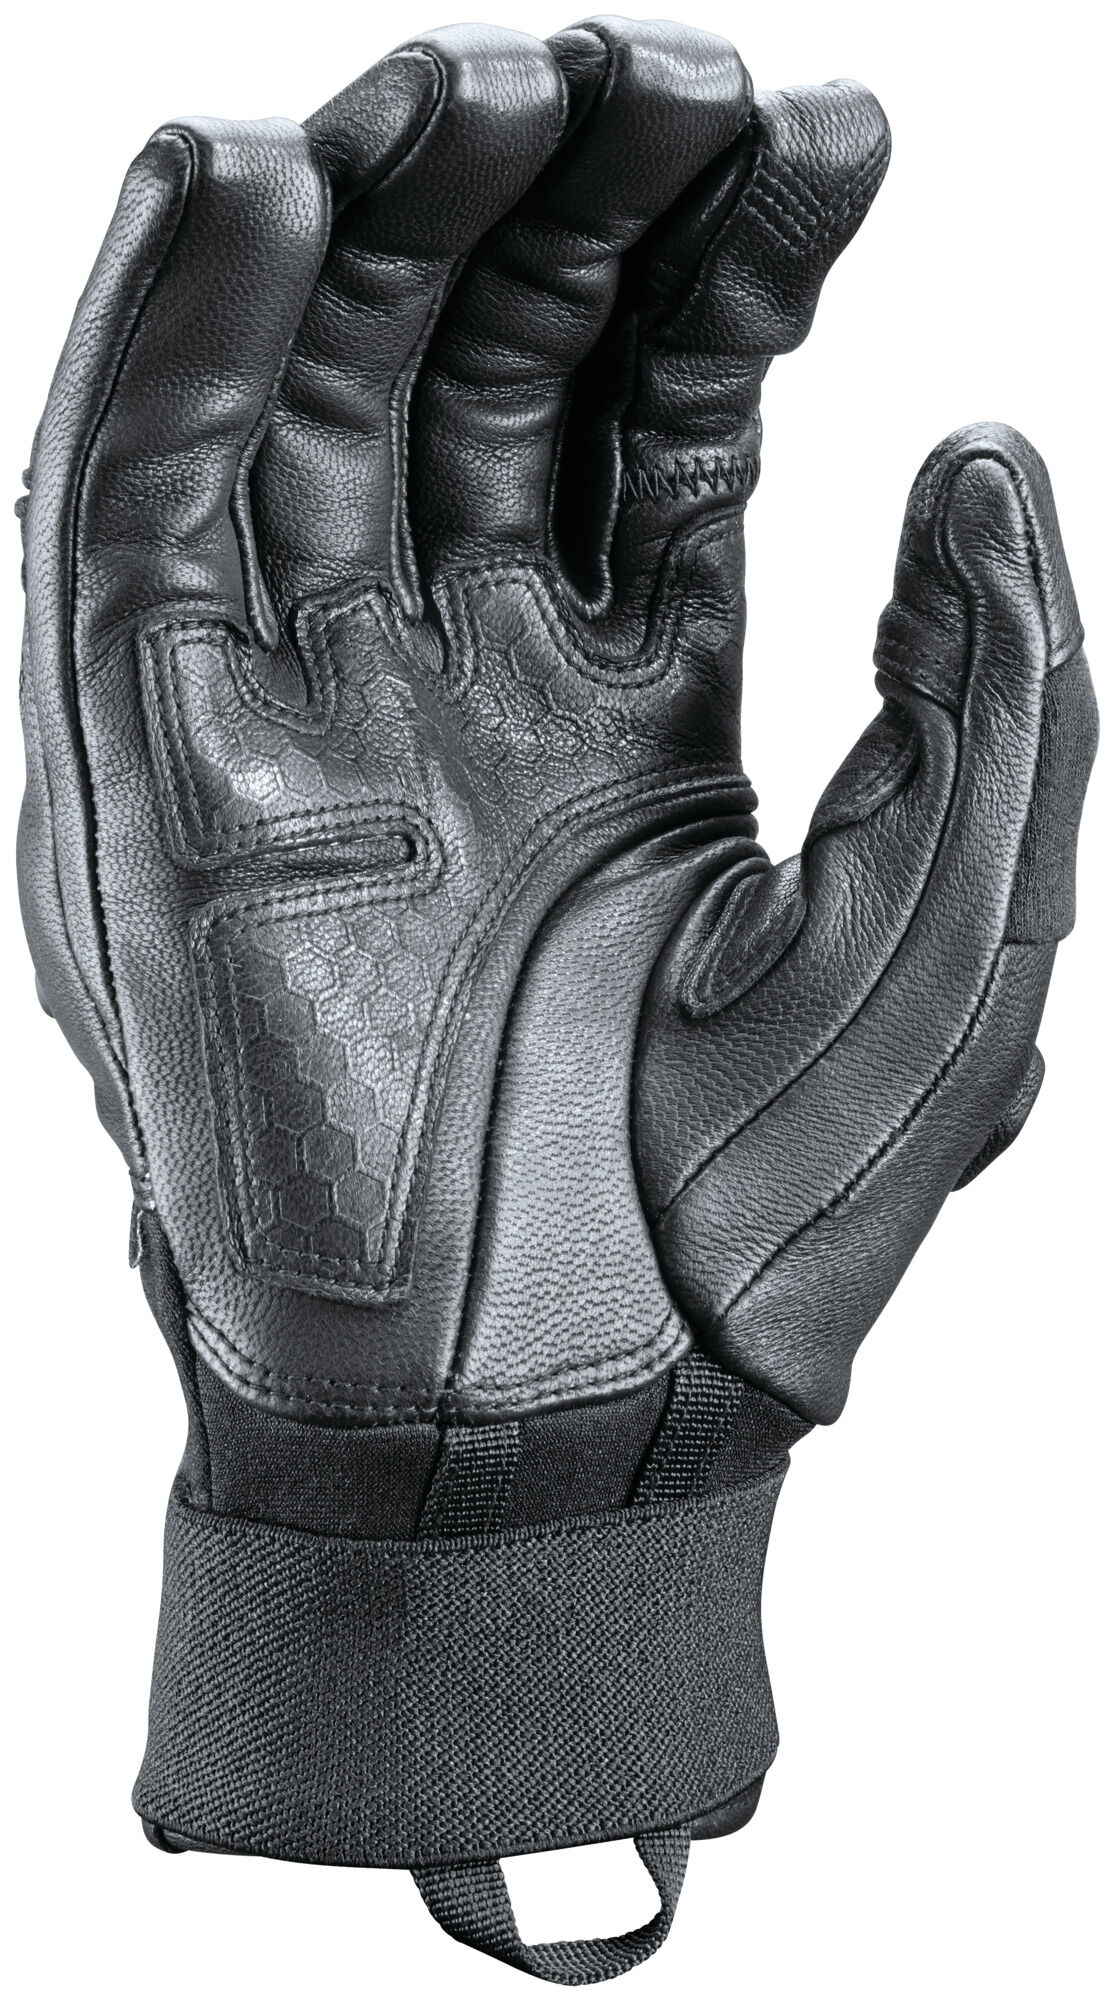 LINE OF FIRE RECON TOUCH SCREEN GLOVES COMBAT HARD KNUCKLE BLACK SIZE S 